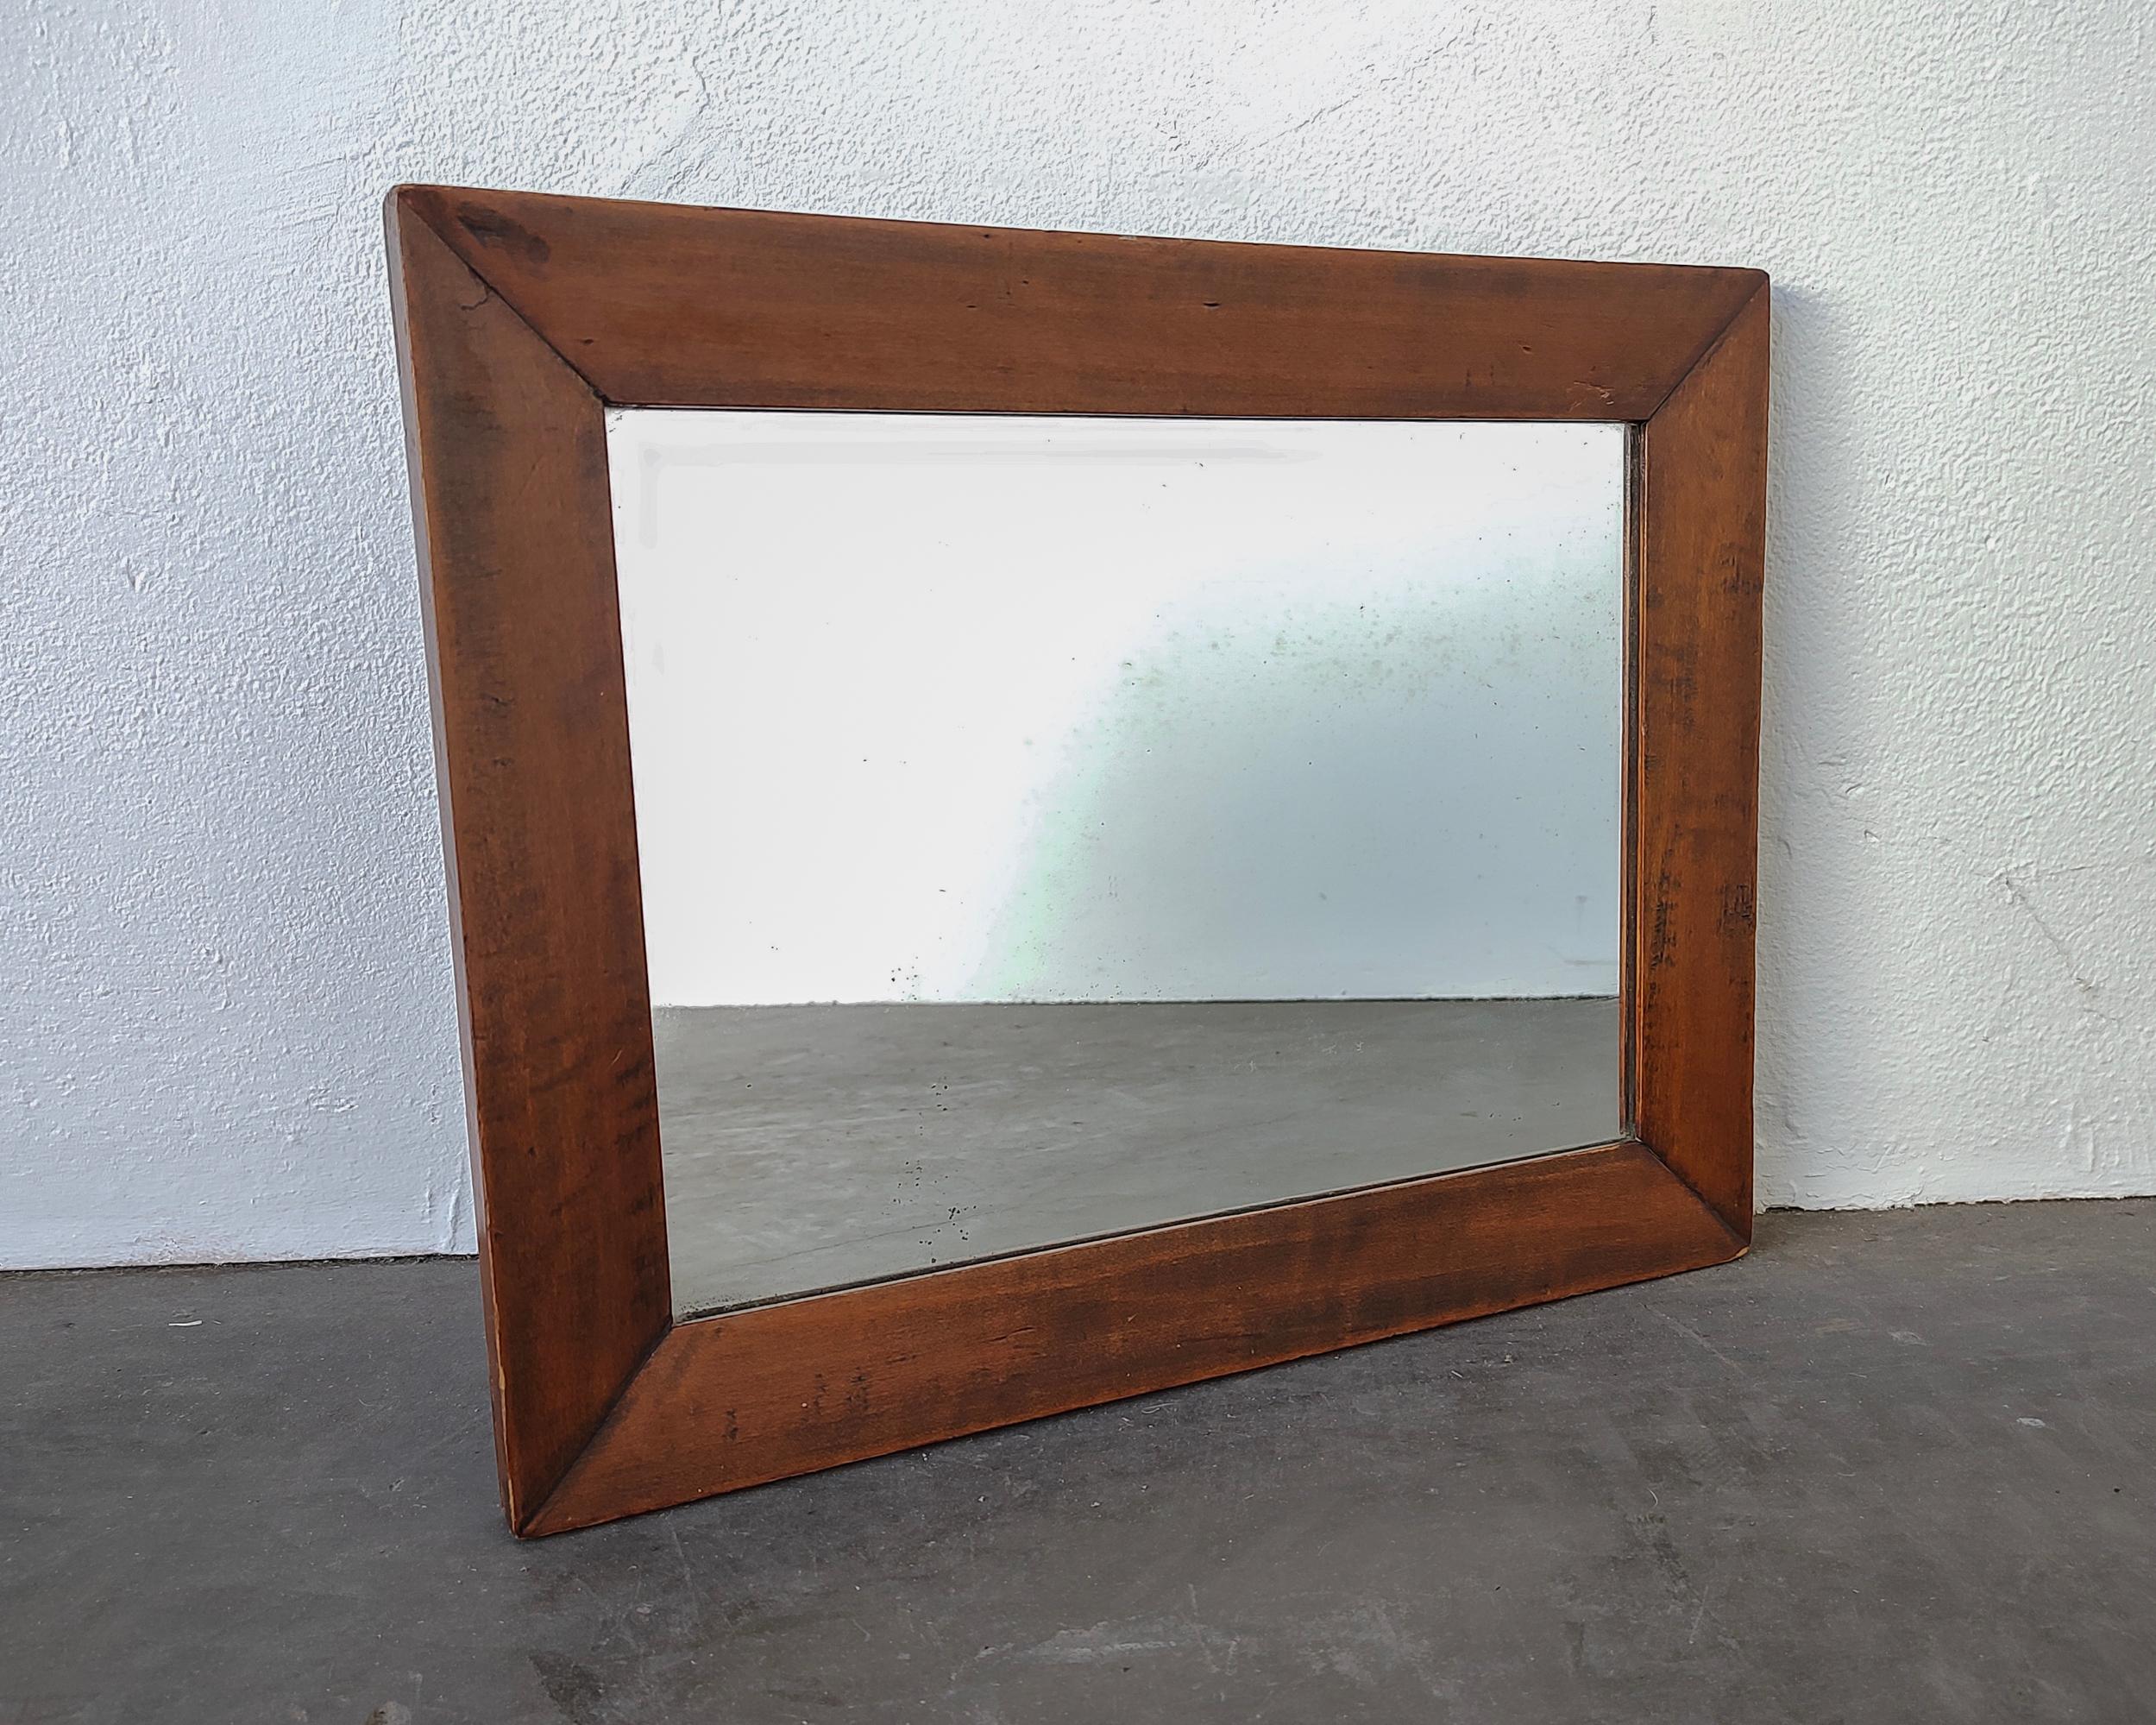 Antique mirror with a solid wood frame that has mitered joinery. Definite signs of age on the mirroring, some fogging and light corrosion spots. 

1